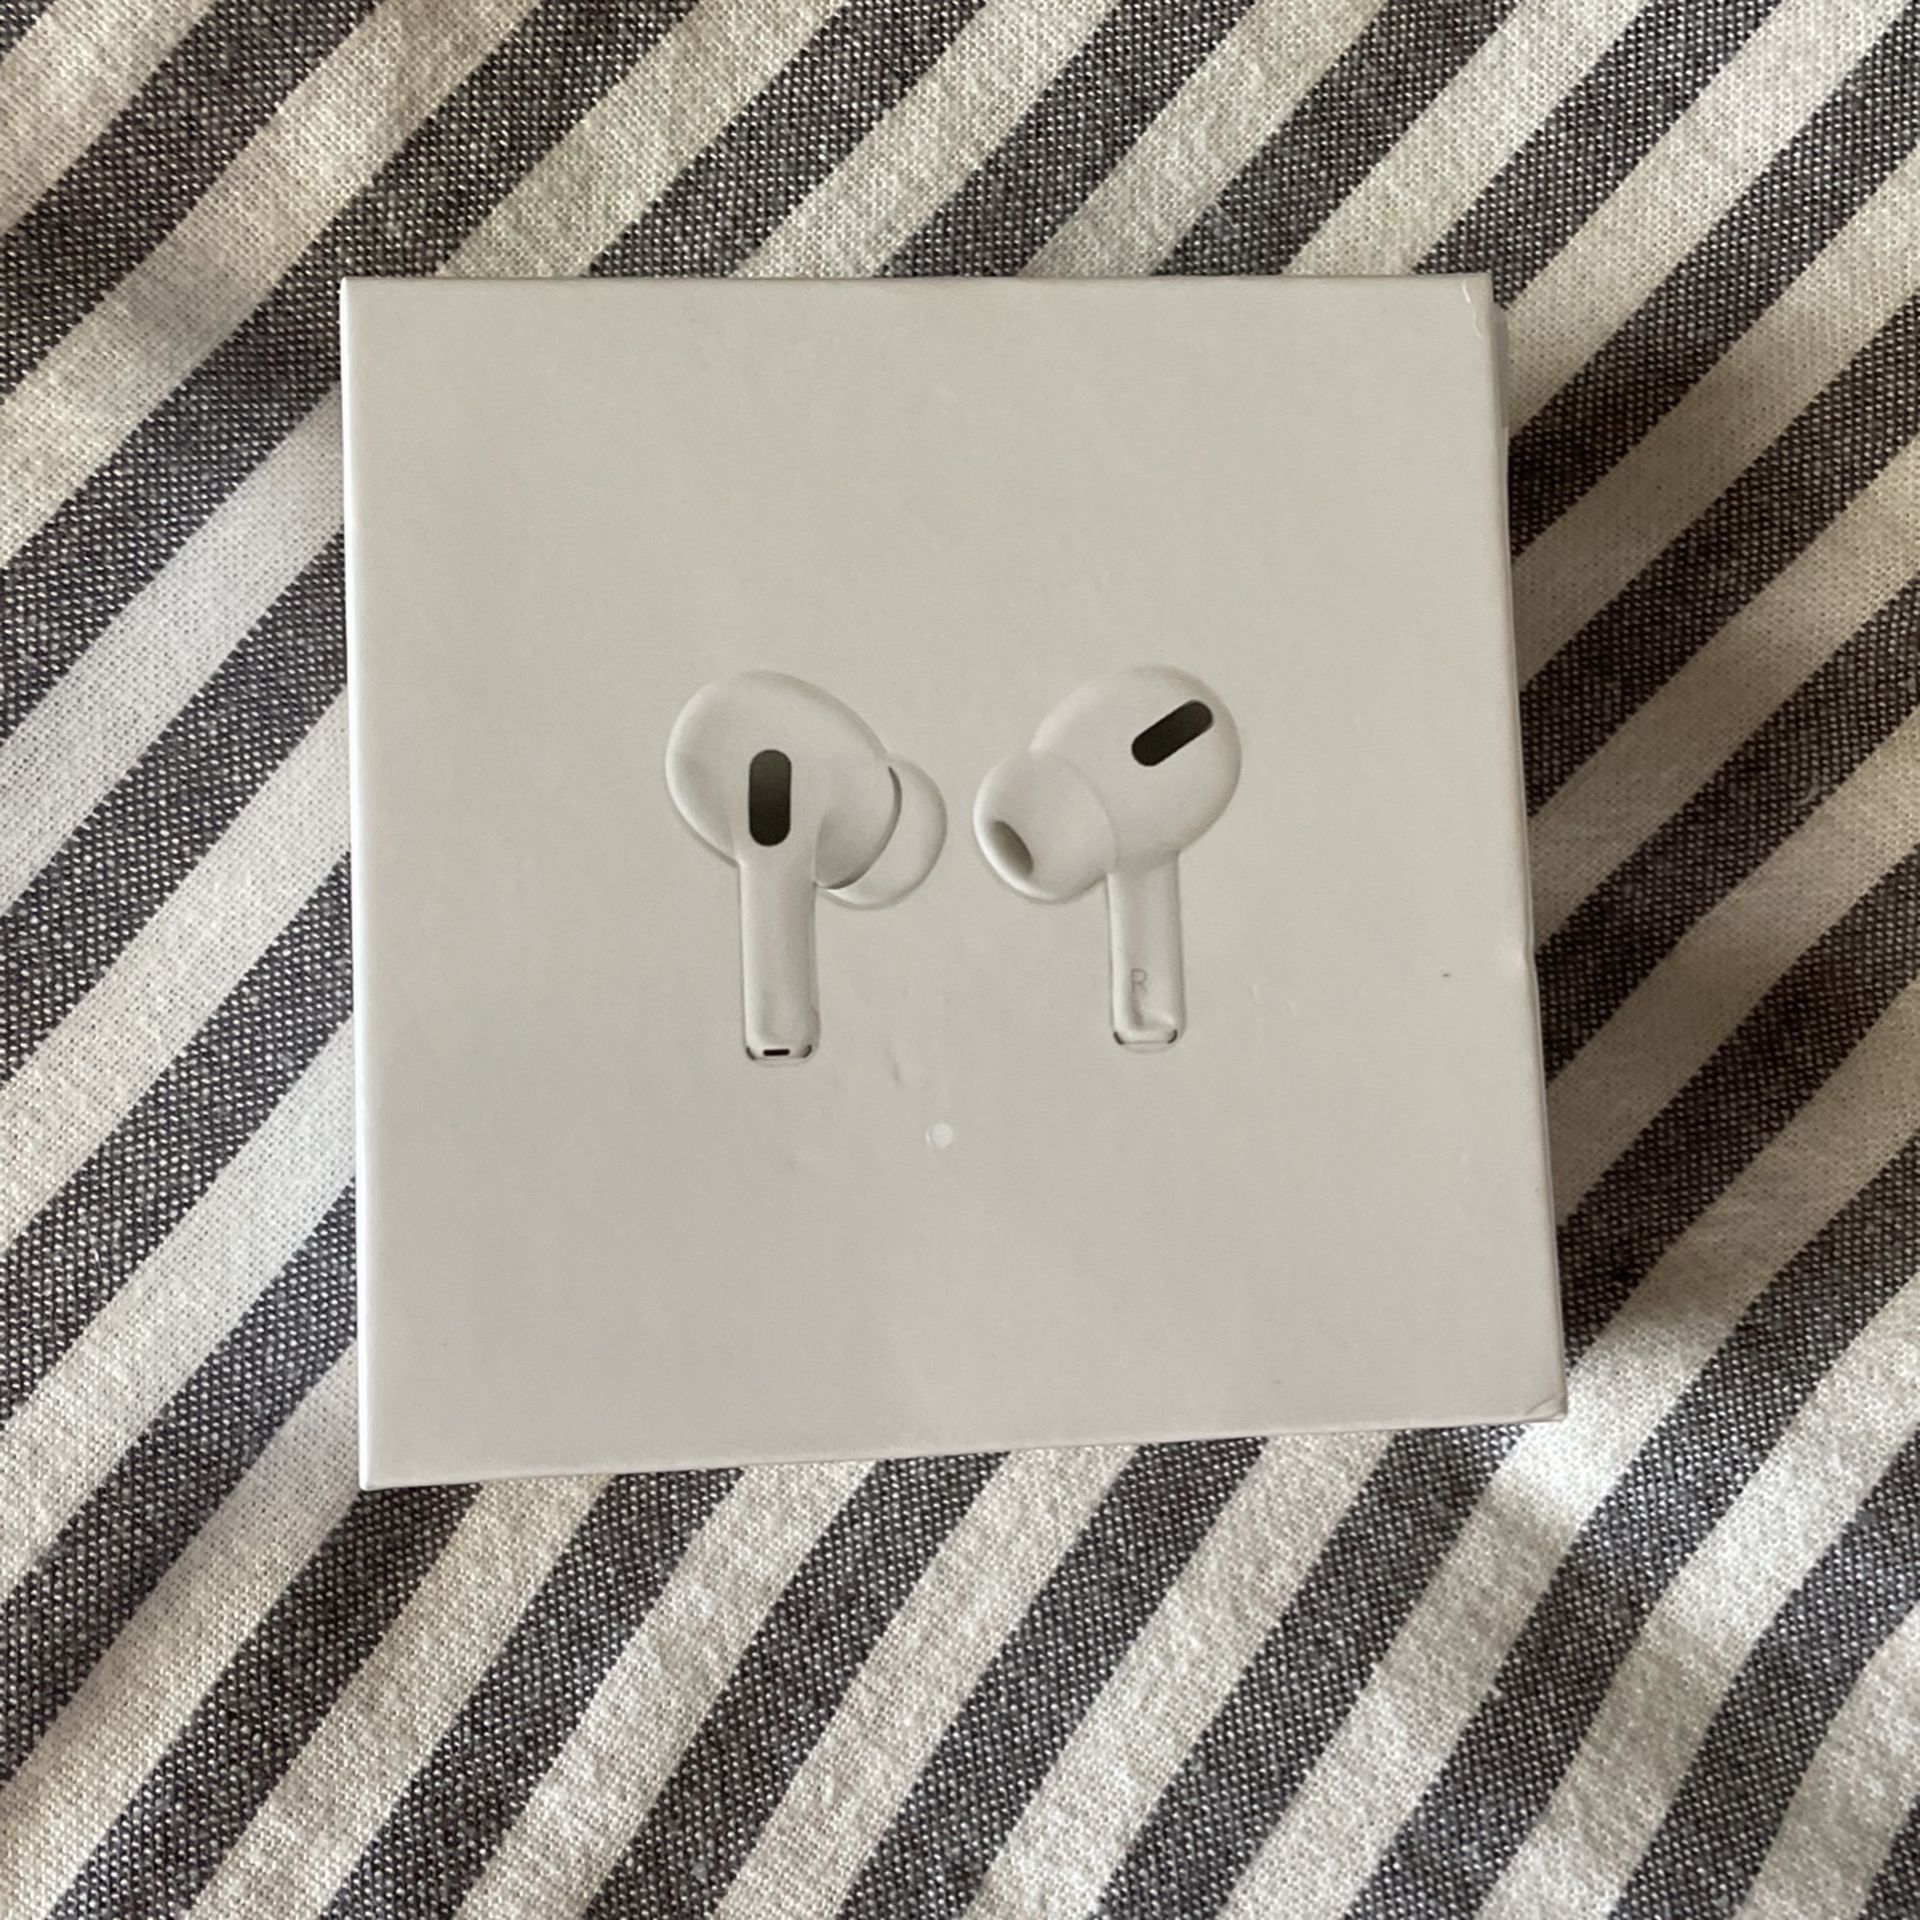 AirPod Pros 2nd Generation